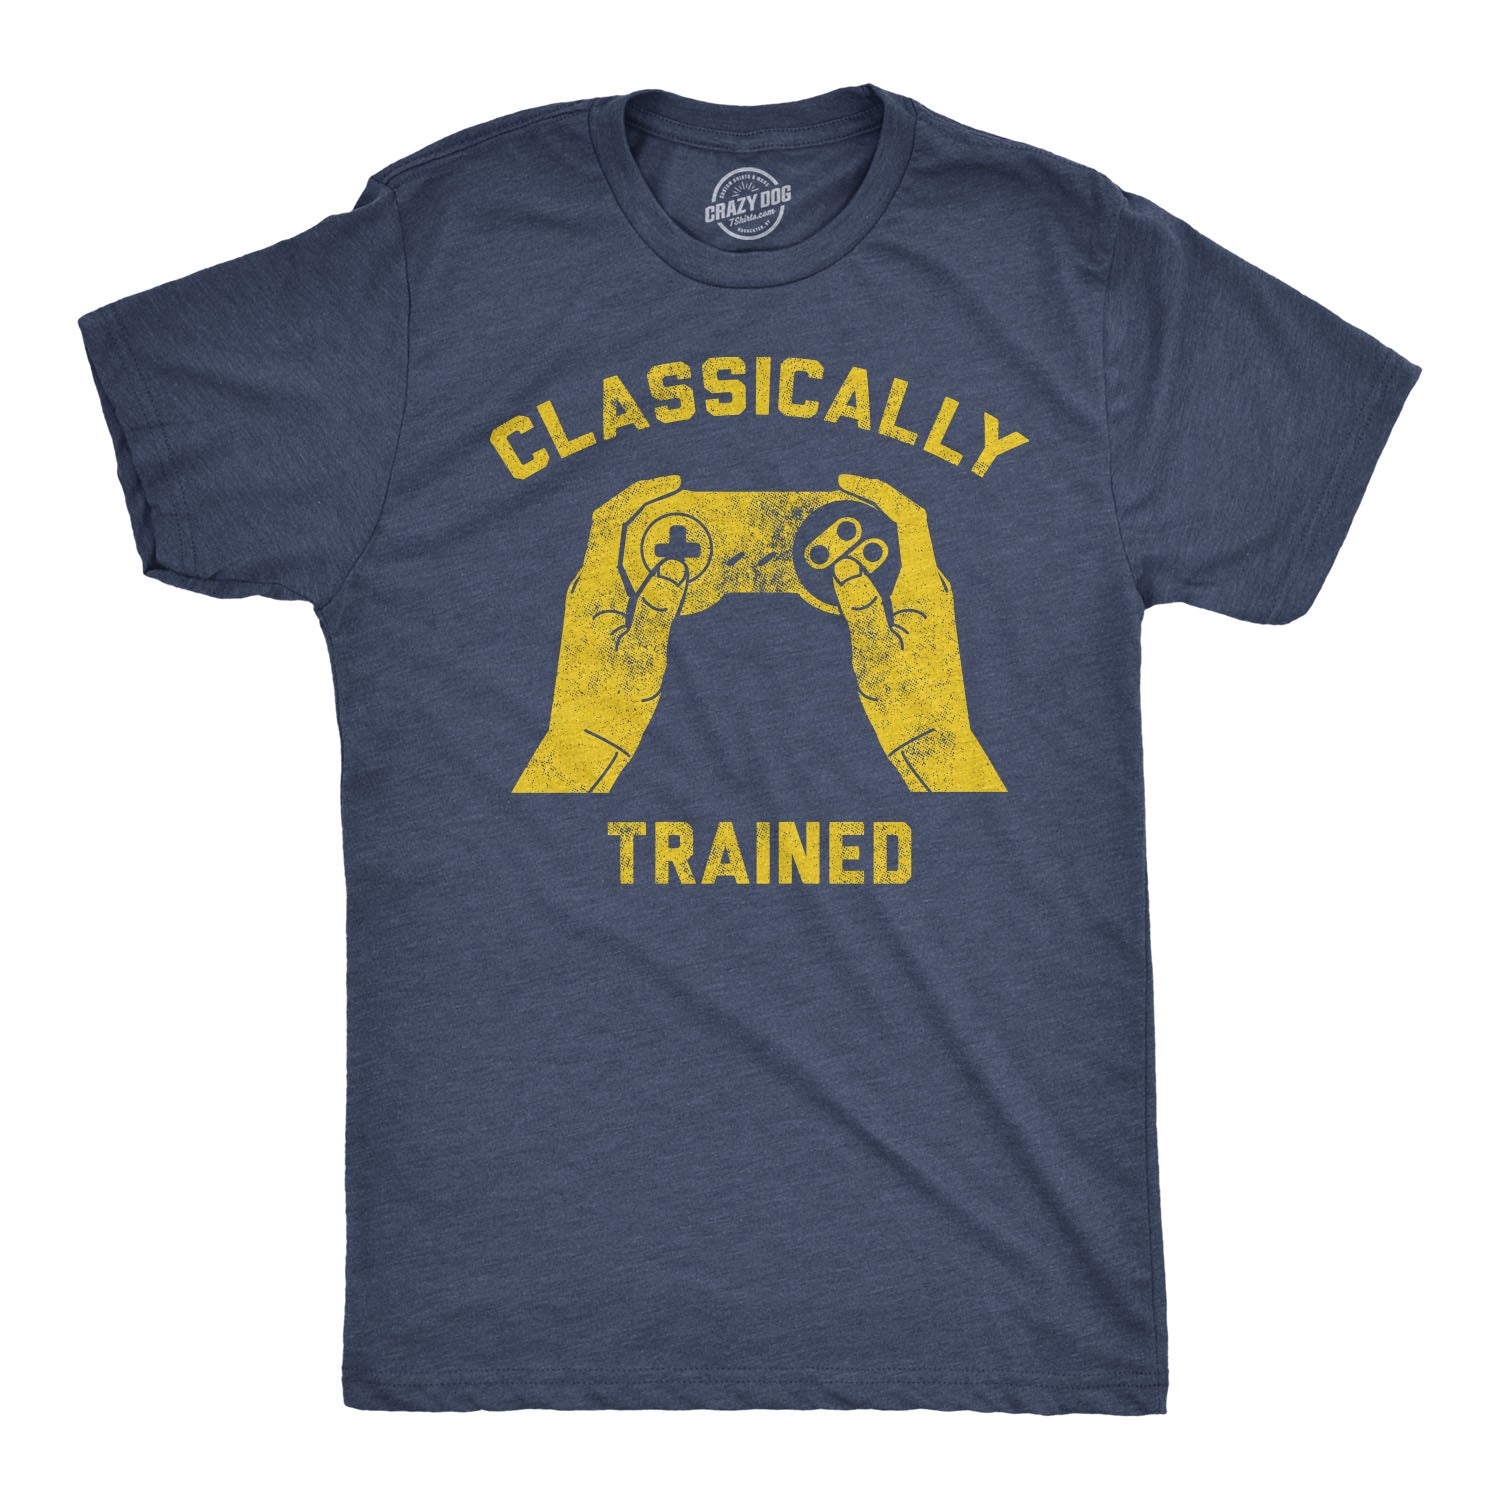 Classically Trained Gamer Vintage Retro Gaming Arcade 80s パーカー